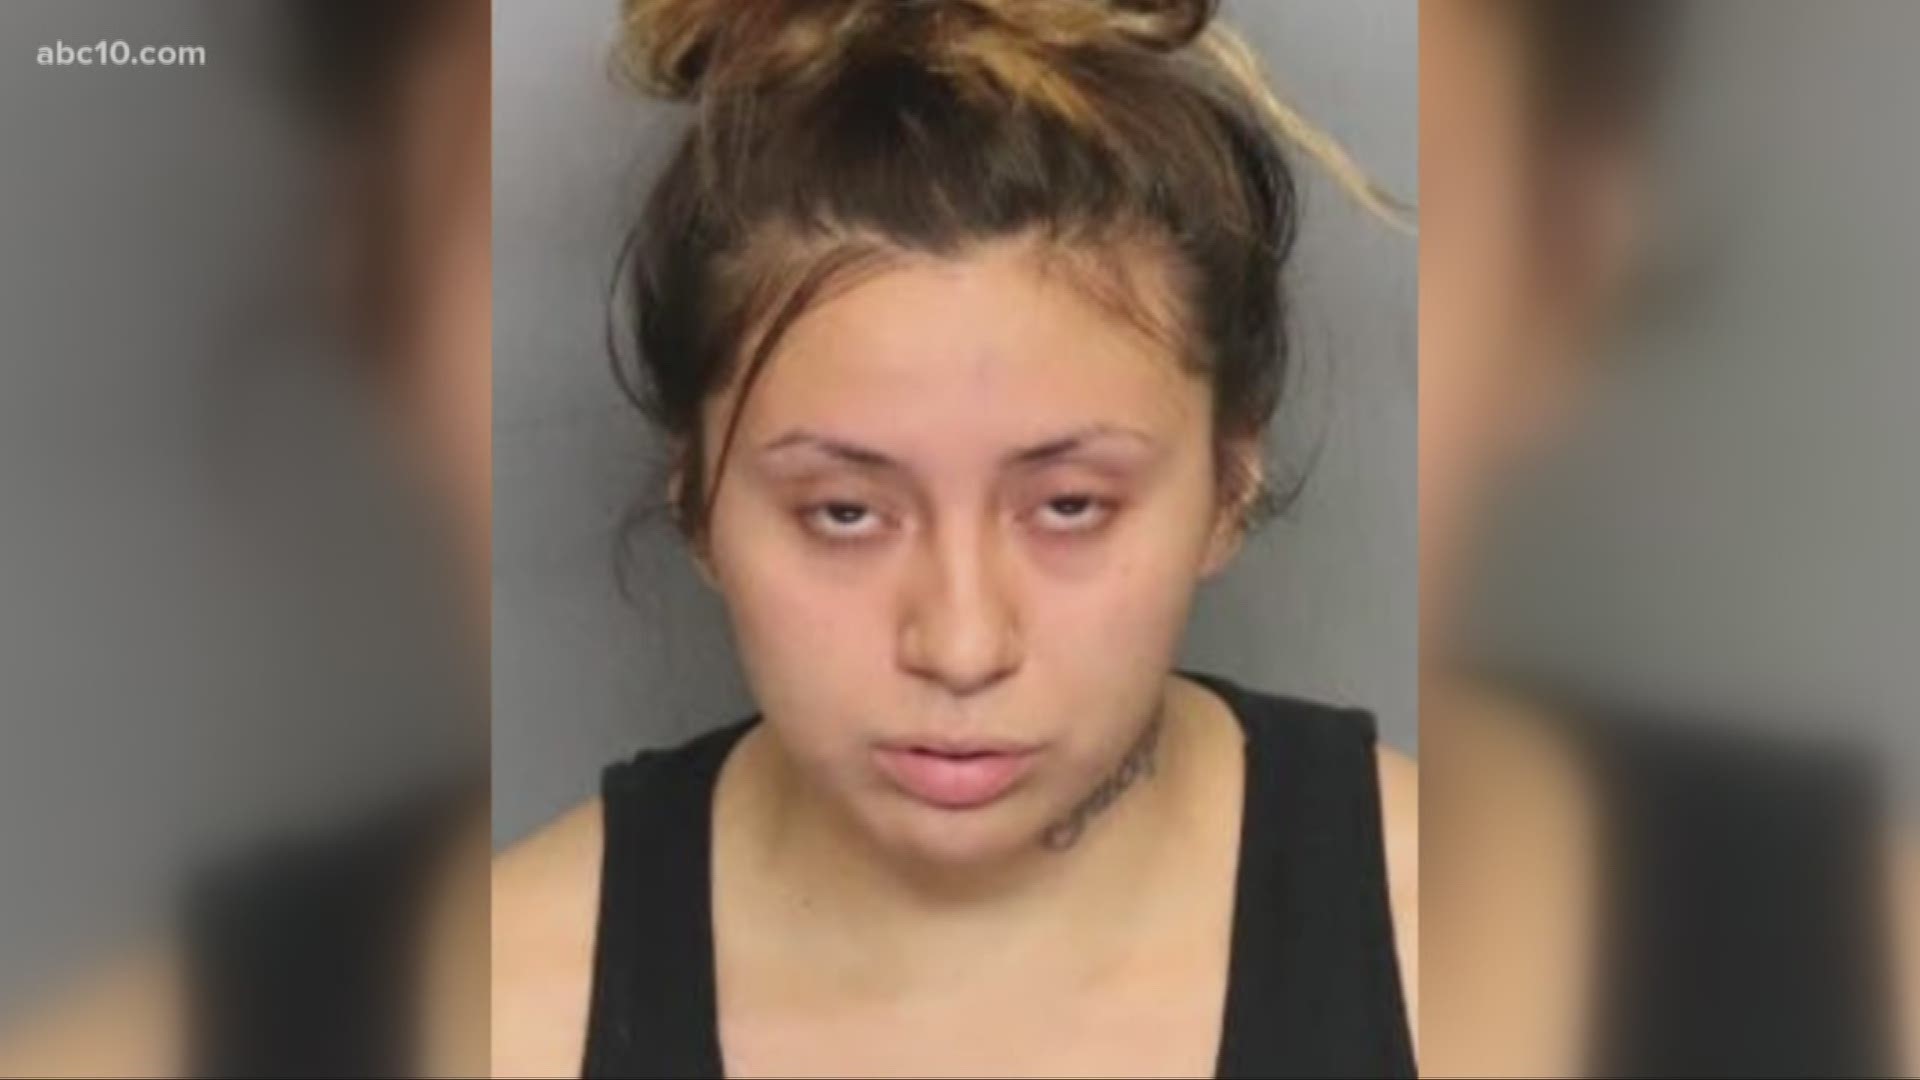 Stockton Police arrested Obdulia Sanchez just weeks after she was released from prison for a DUI crash that killed her sister, that Sanchez also livestreamed.